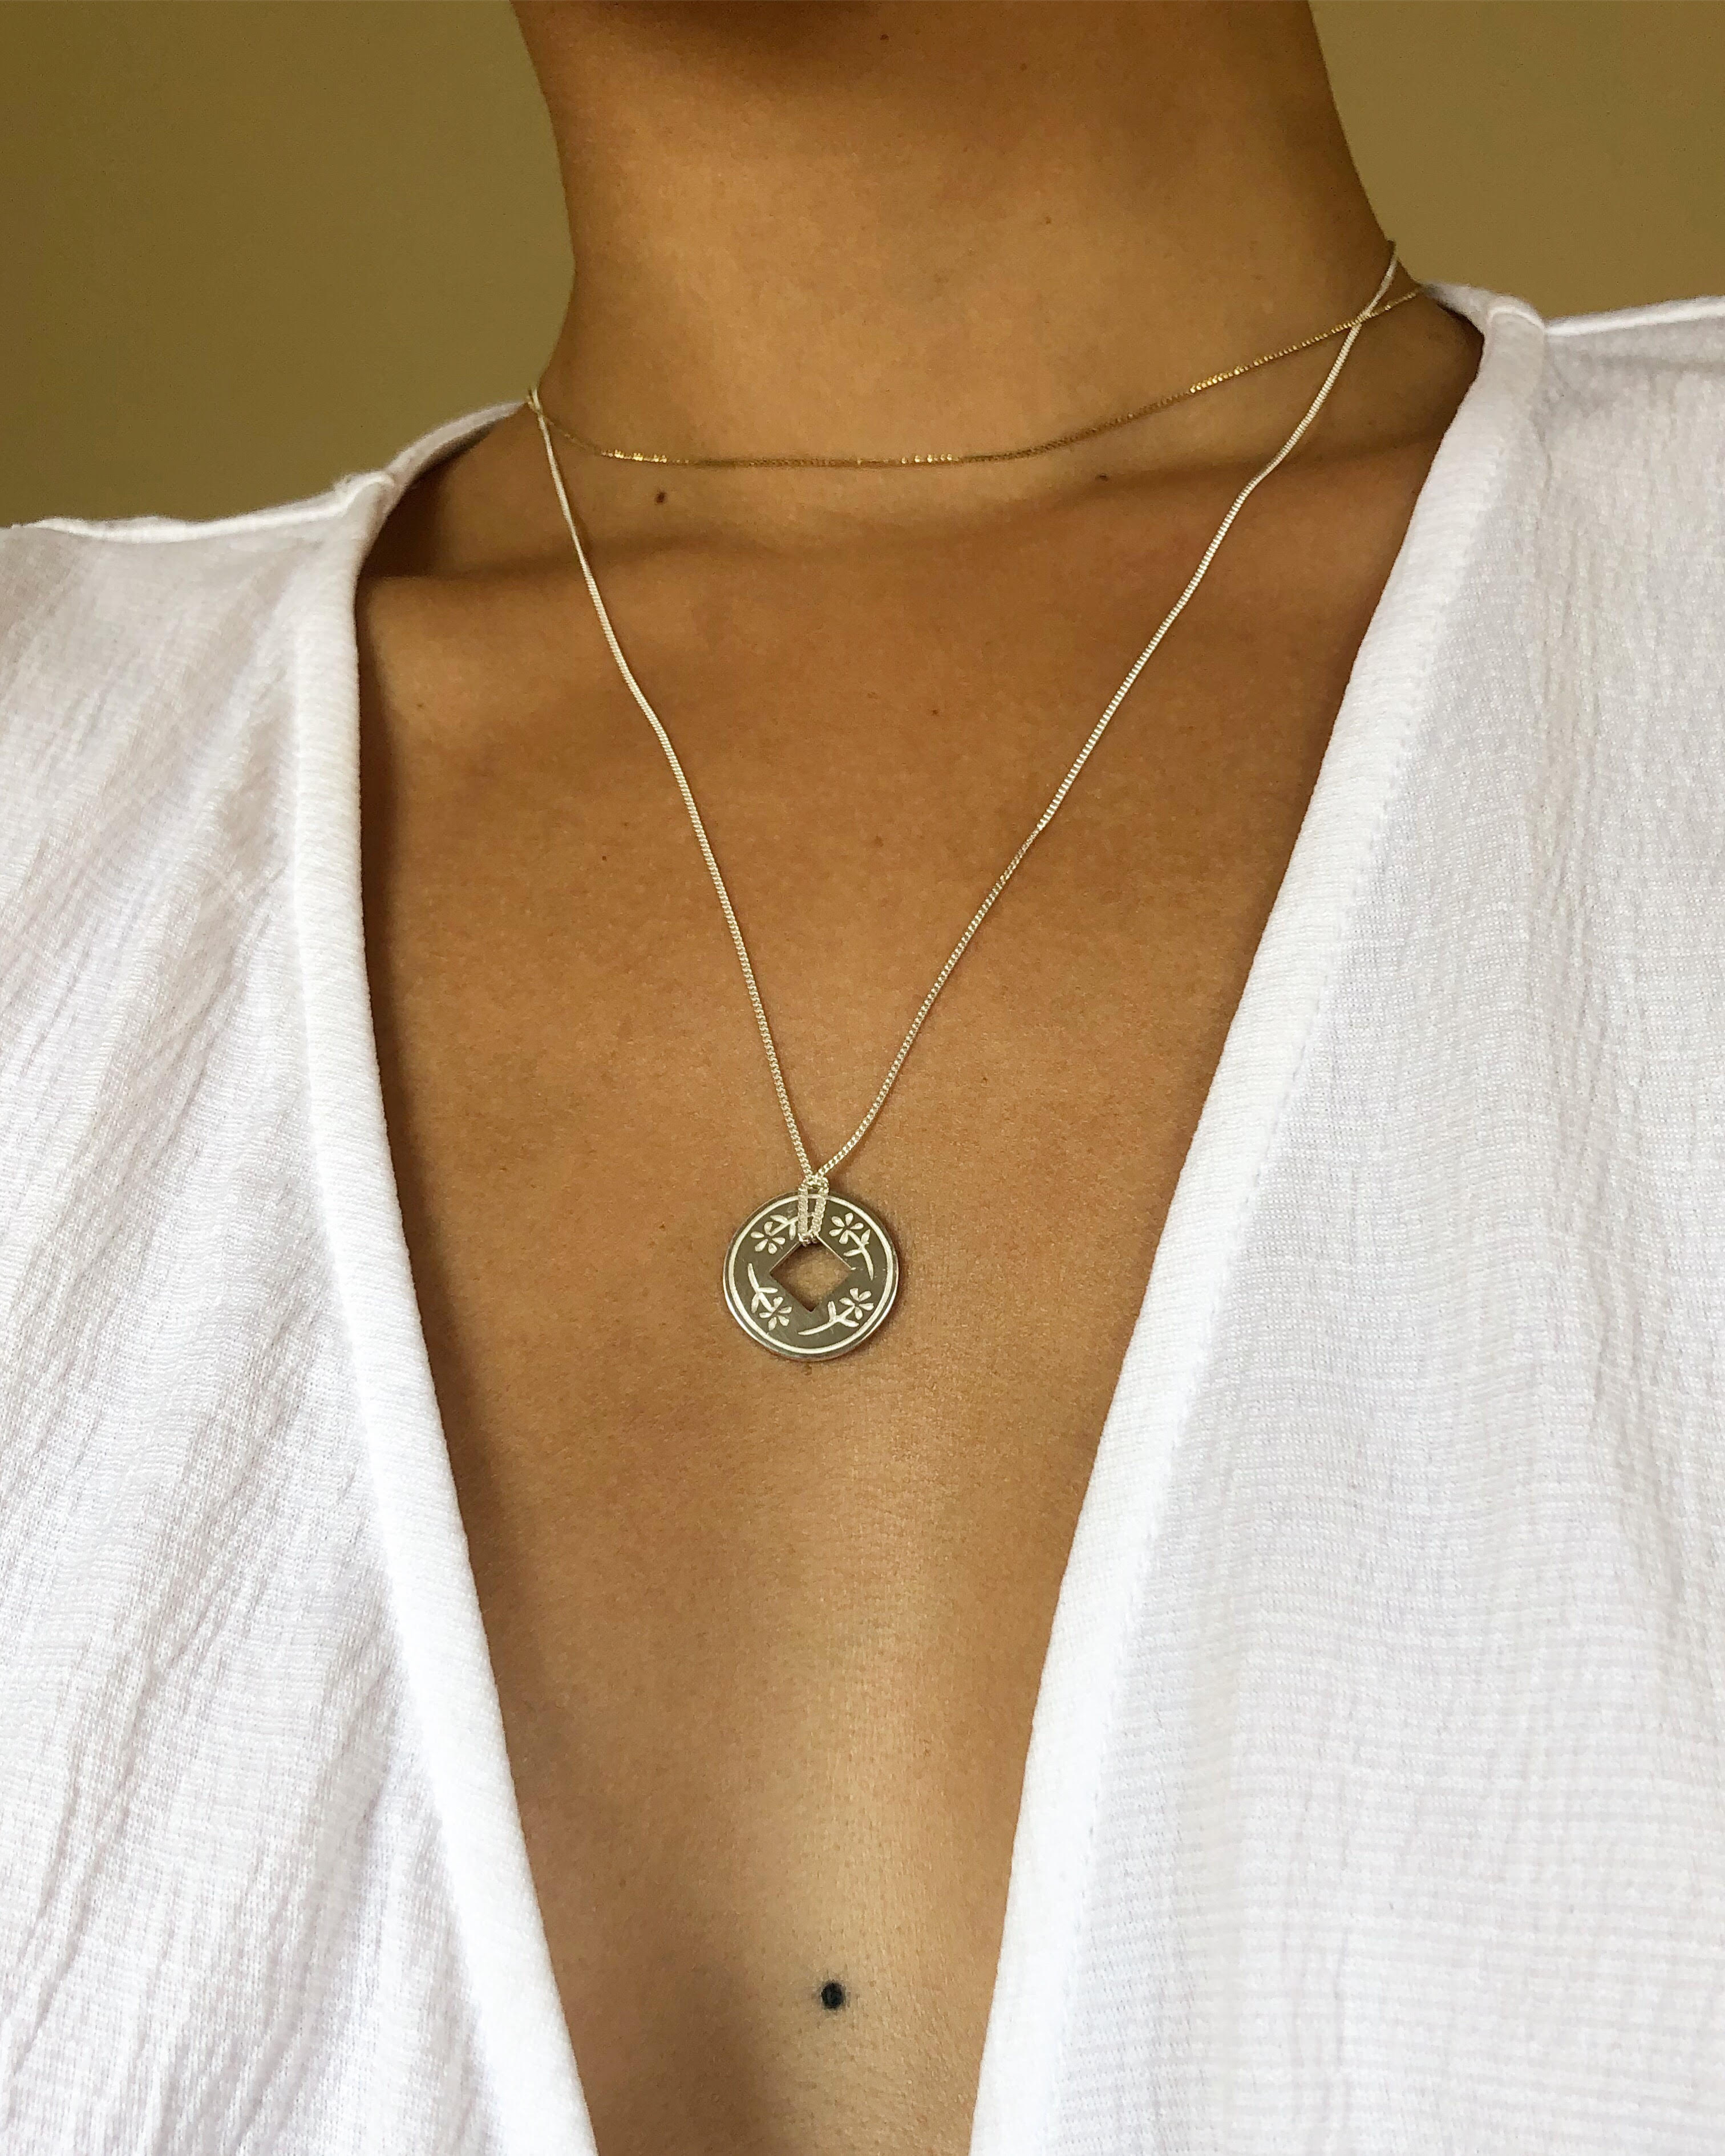 Small Coin Necklace Elizabeth Coin Necklace, Gold Coin Pendant Necklace, Coin  Necklace, Gold Trendy Necklace, Small Medallion GPN00025 -  Canada